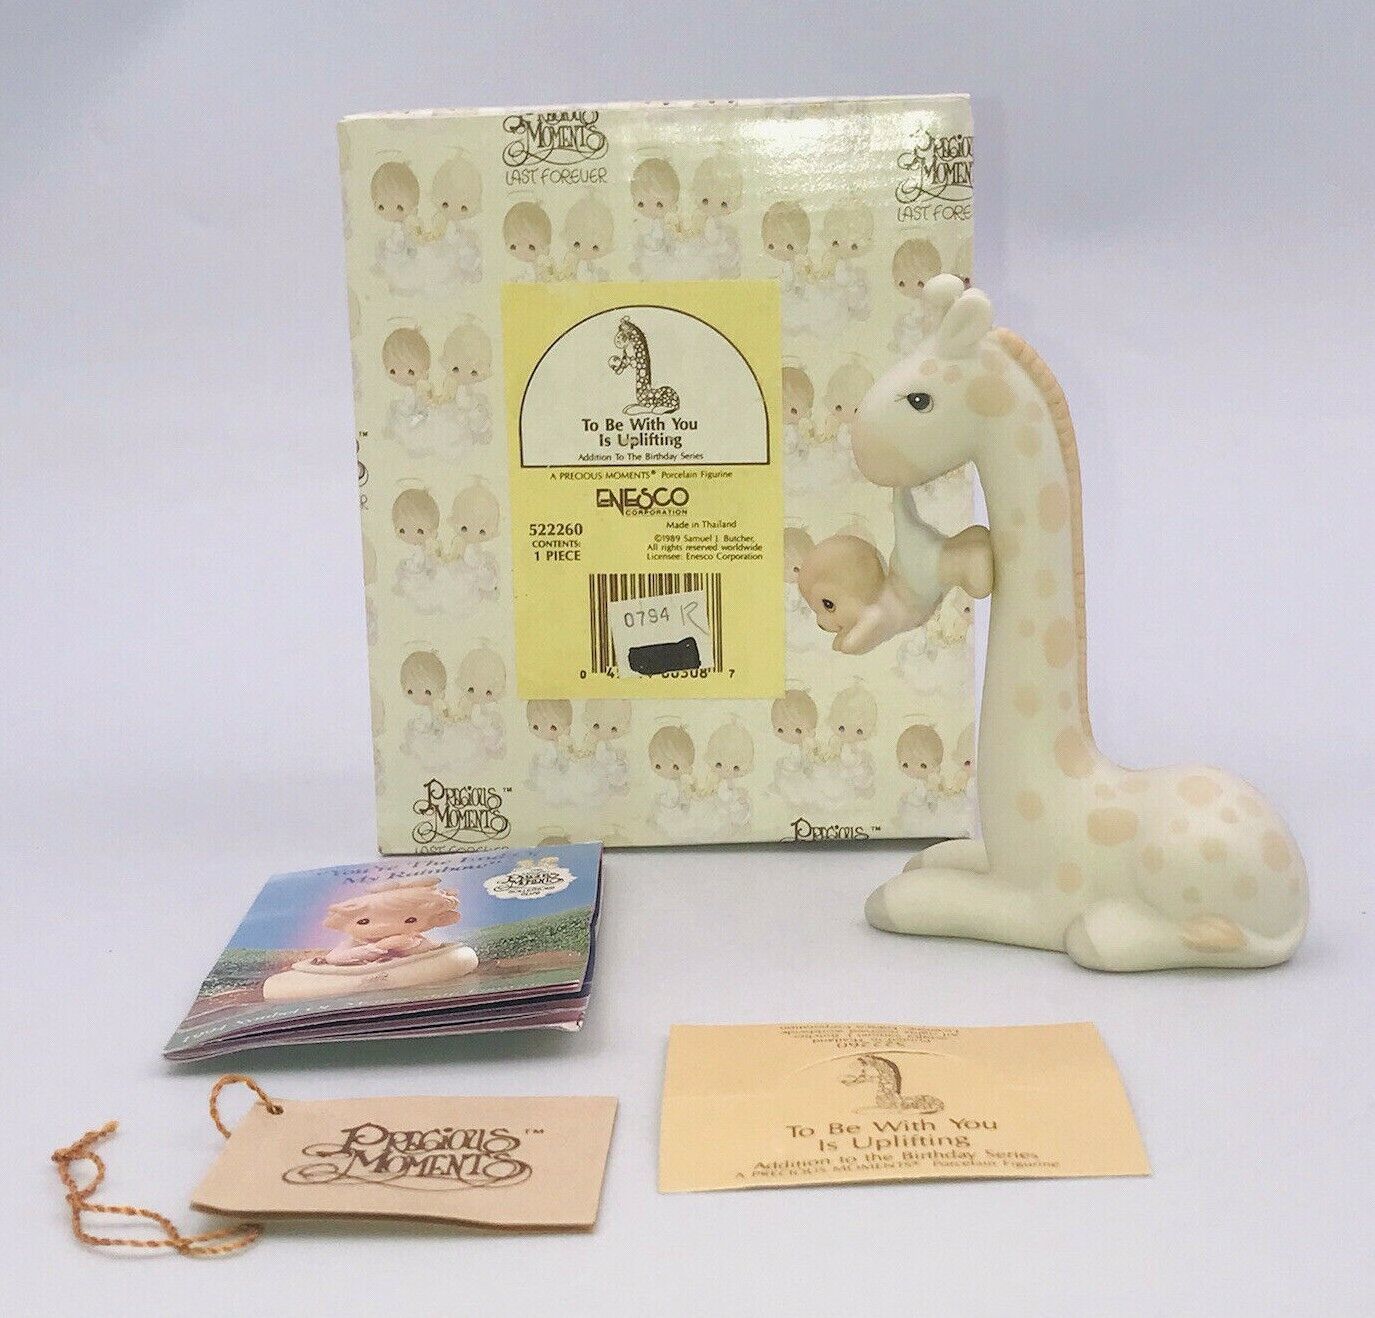 1989 Precious Moments To Be With You Is Uplifting 522260 Giraffe w/ Baby - $11.29